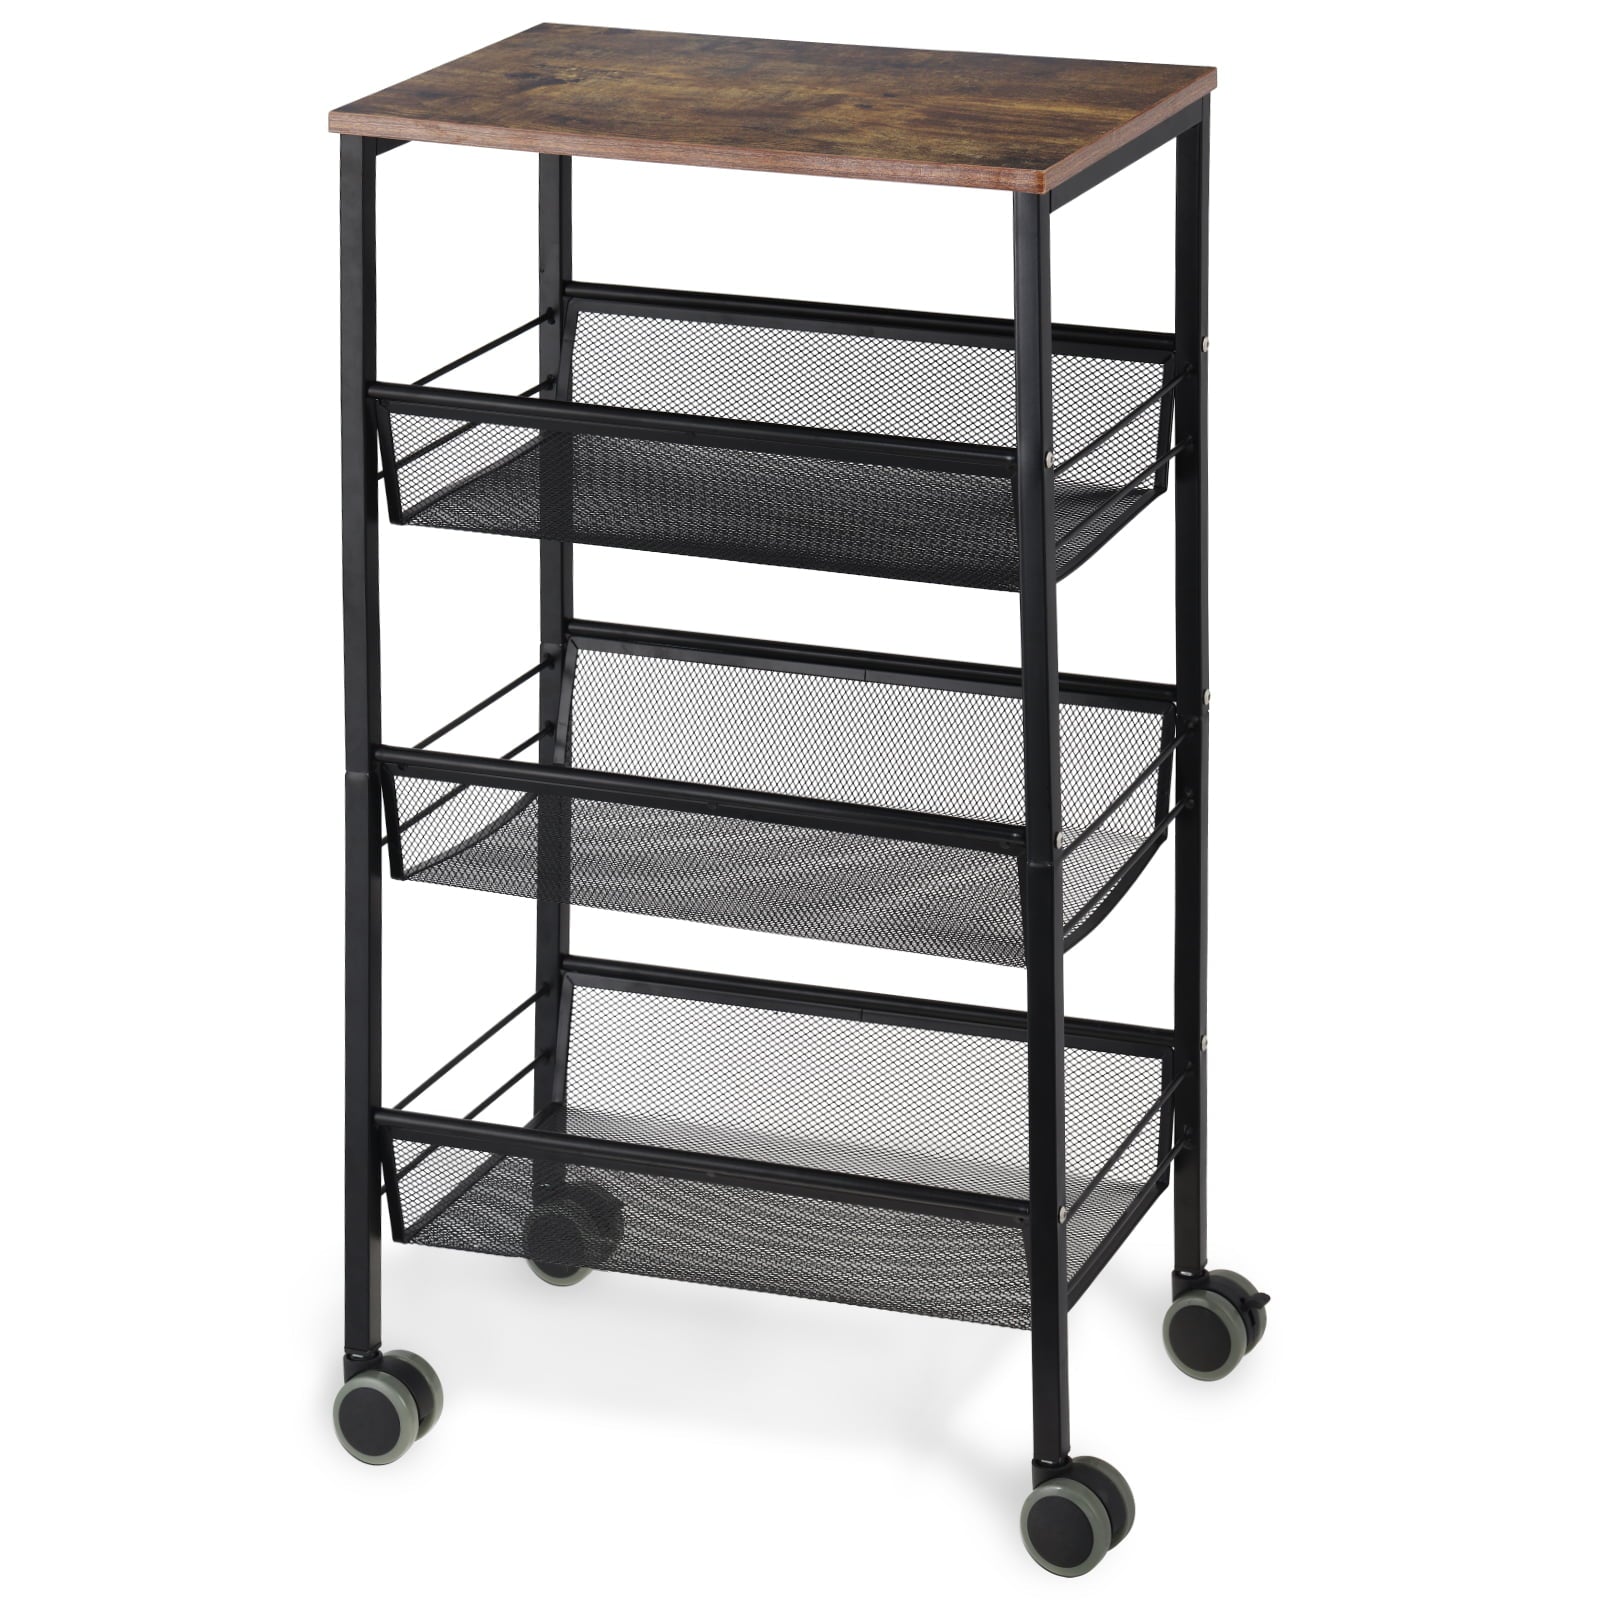 4 Tier Kitchen Storage Rolling Cart on Wheels for Kitchen Bathroom Living Room Rustic，17.3